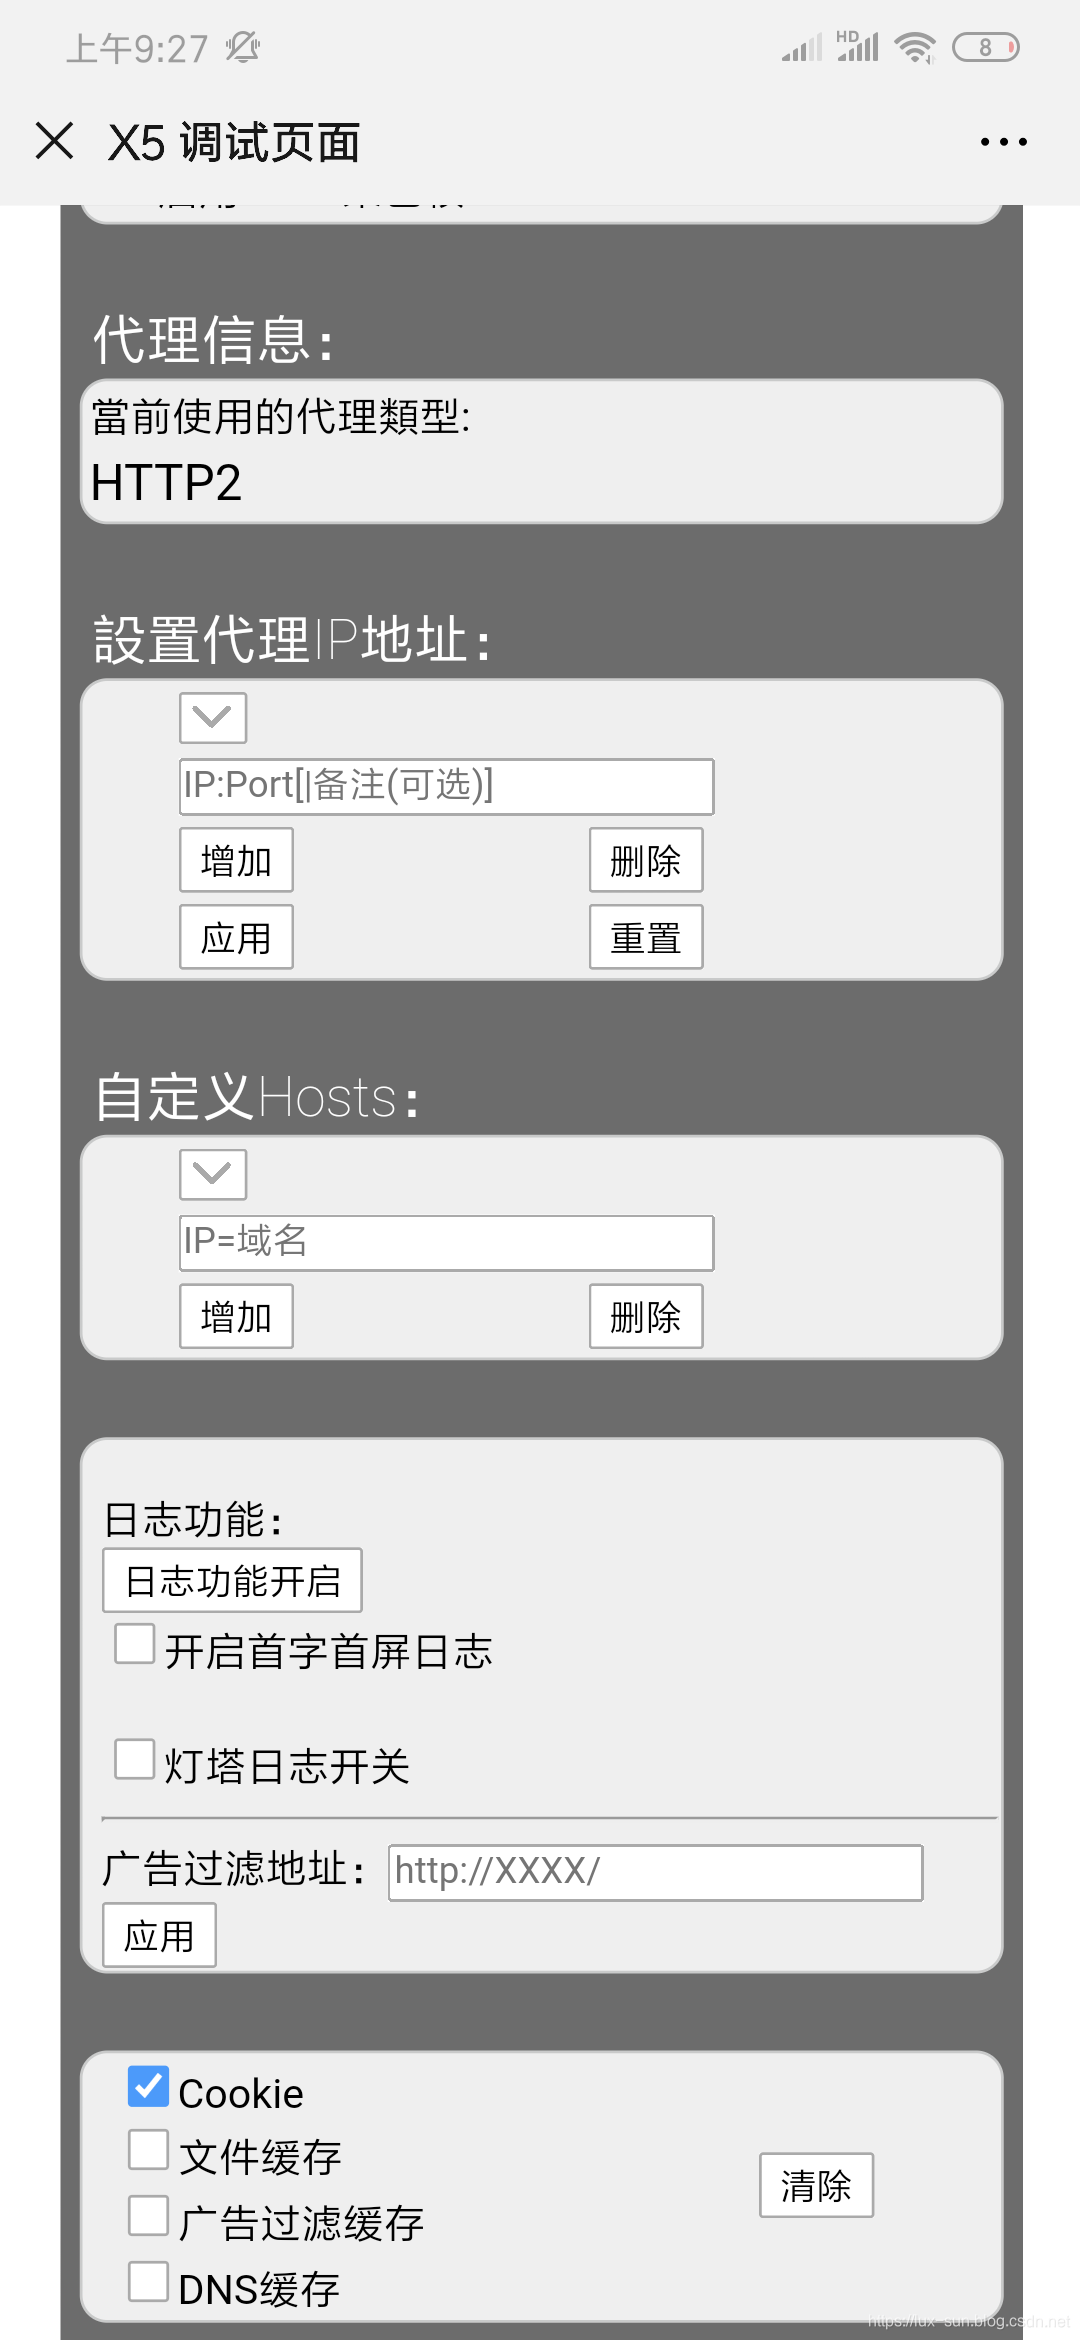 Mobile - 微信清理内置浏览器缓存（IOS / Android）